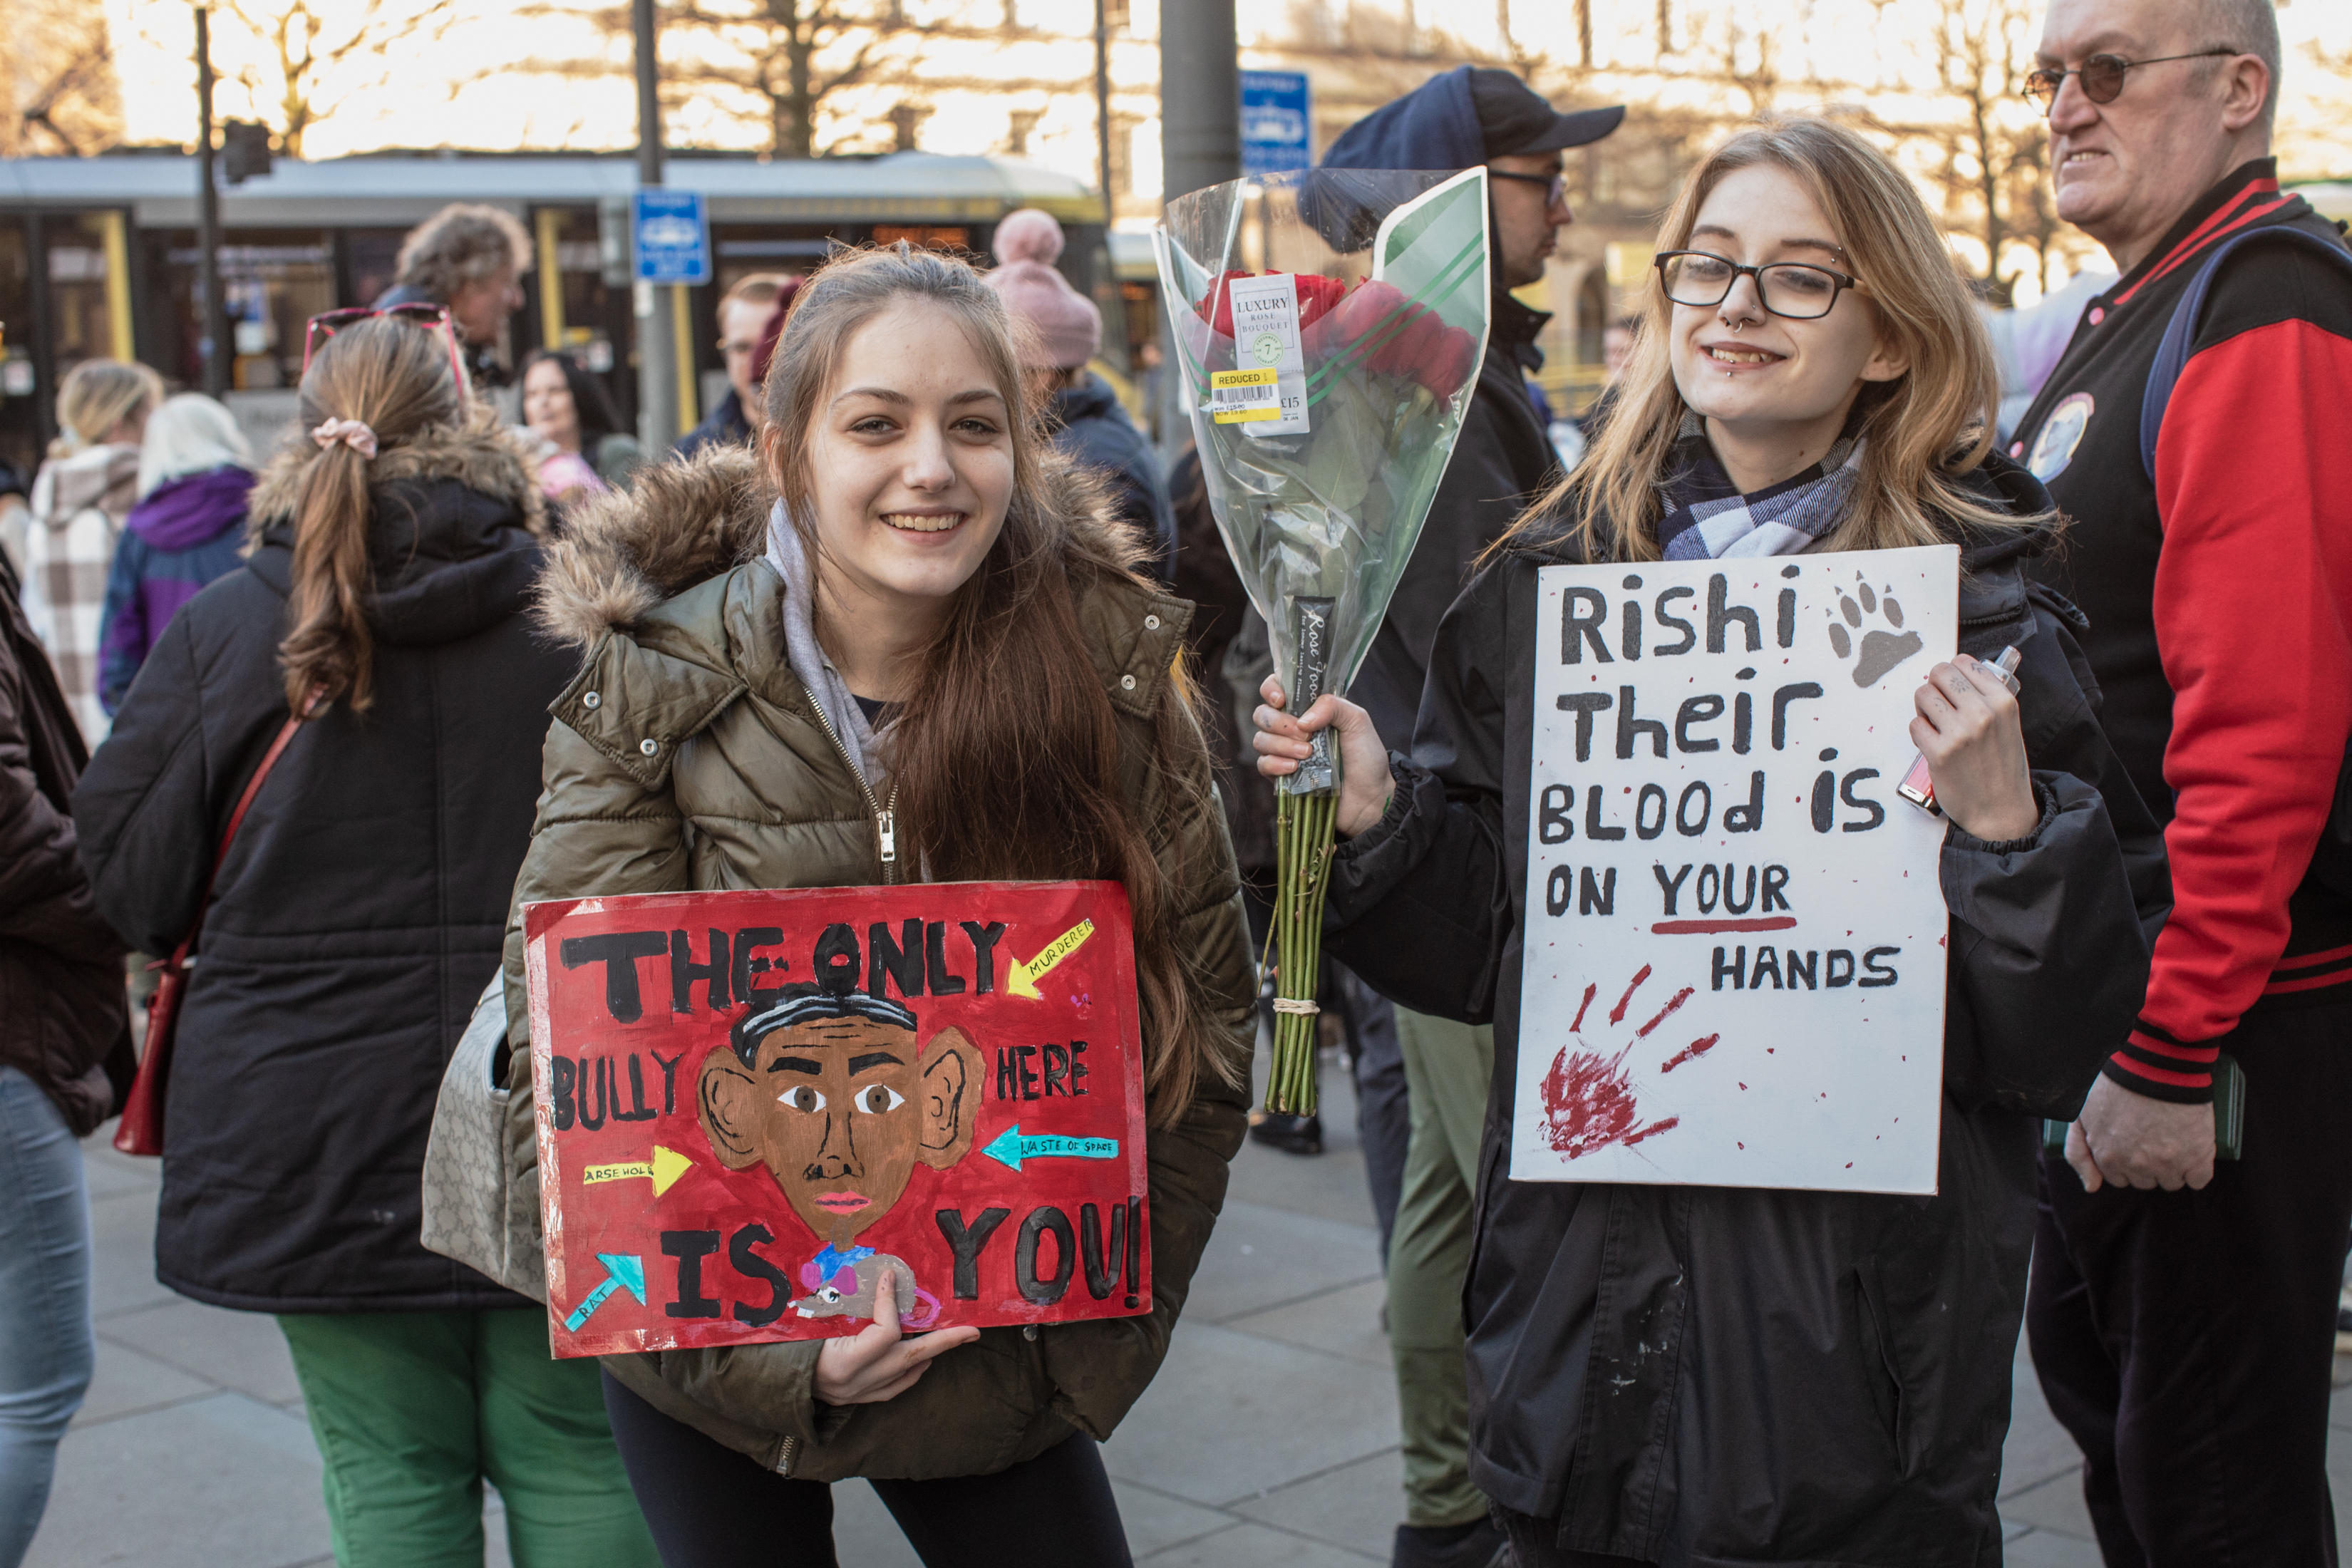 Manchester, UK: Two young girls holding up anti-Rishi Sunak signs at an XL Bully protest